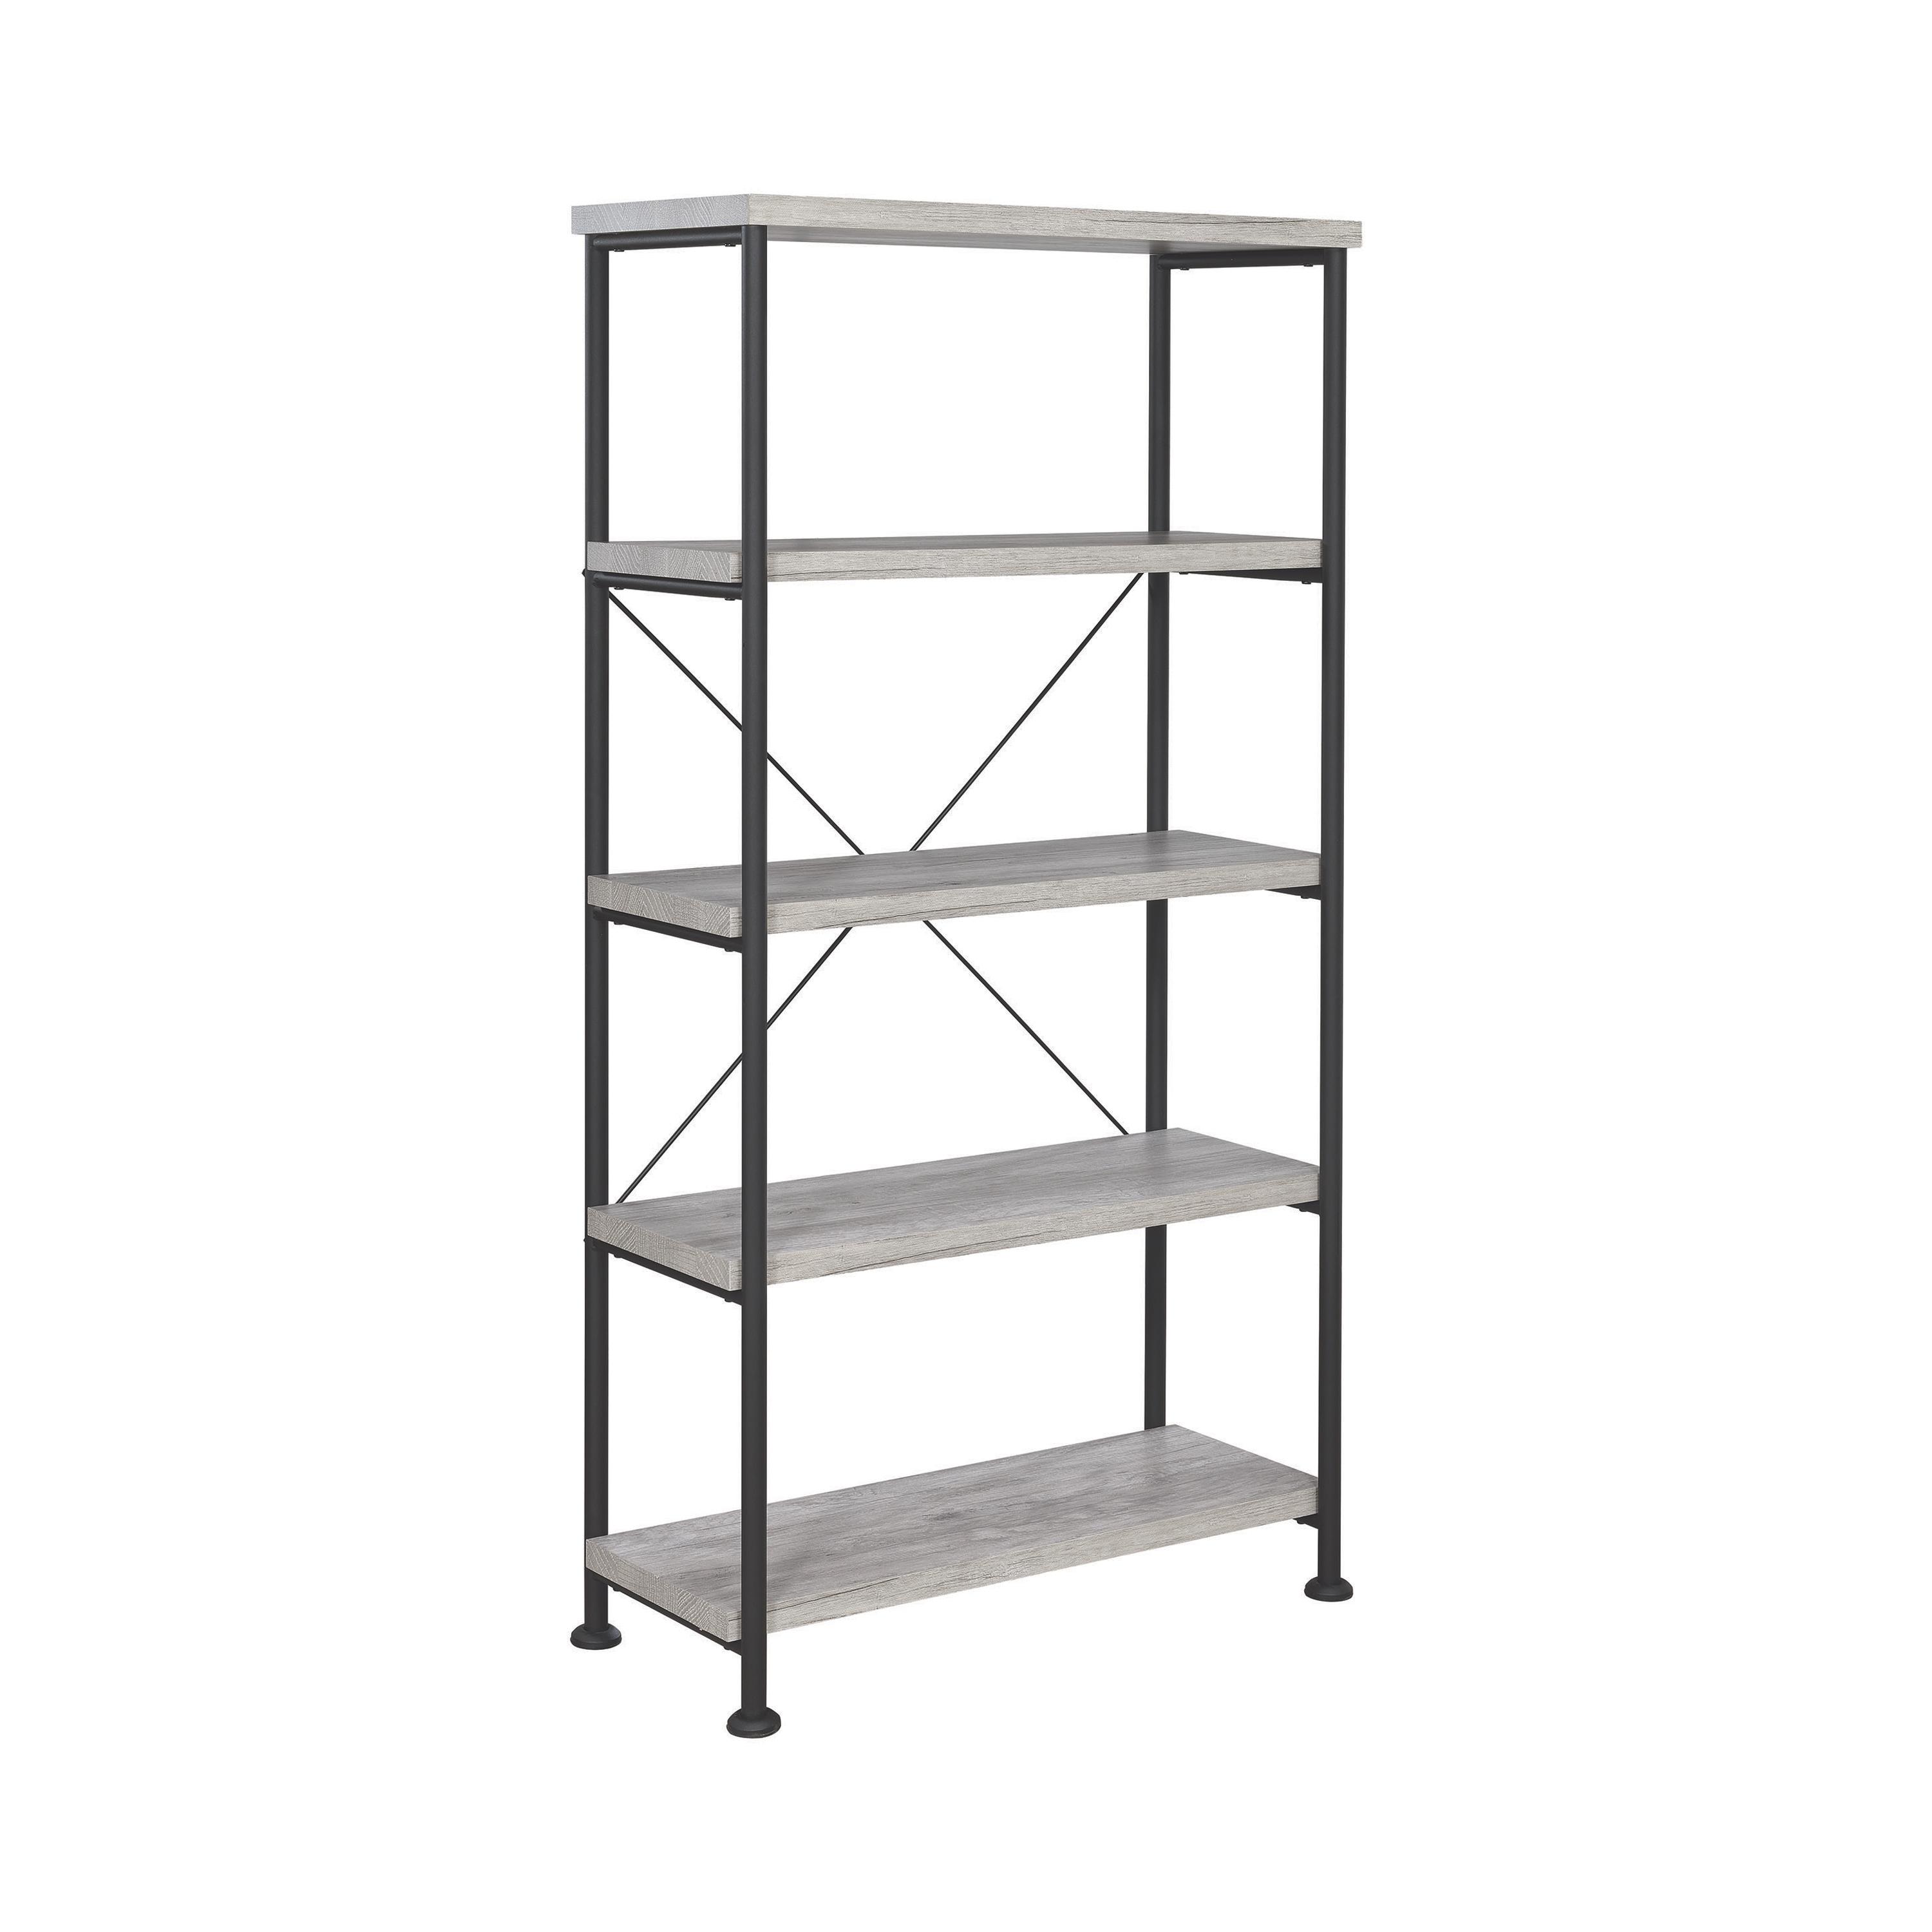 Rustic Bookcase 801546 Analiese 801546 in Gray 